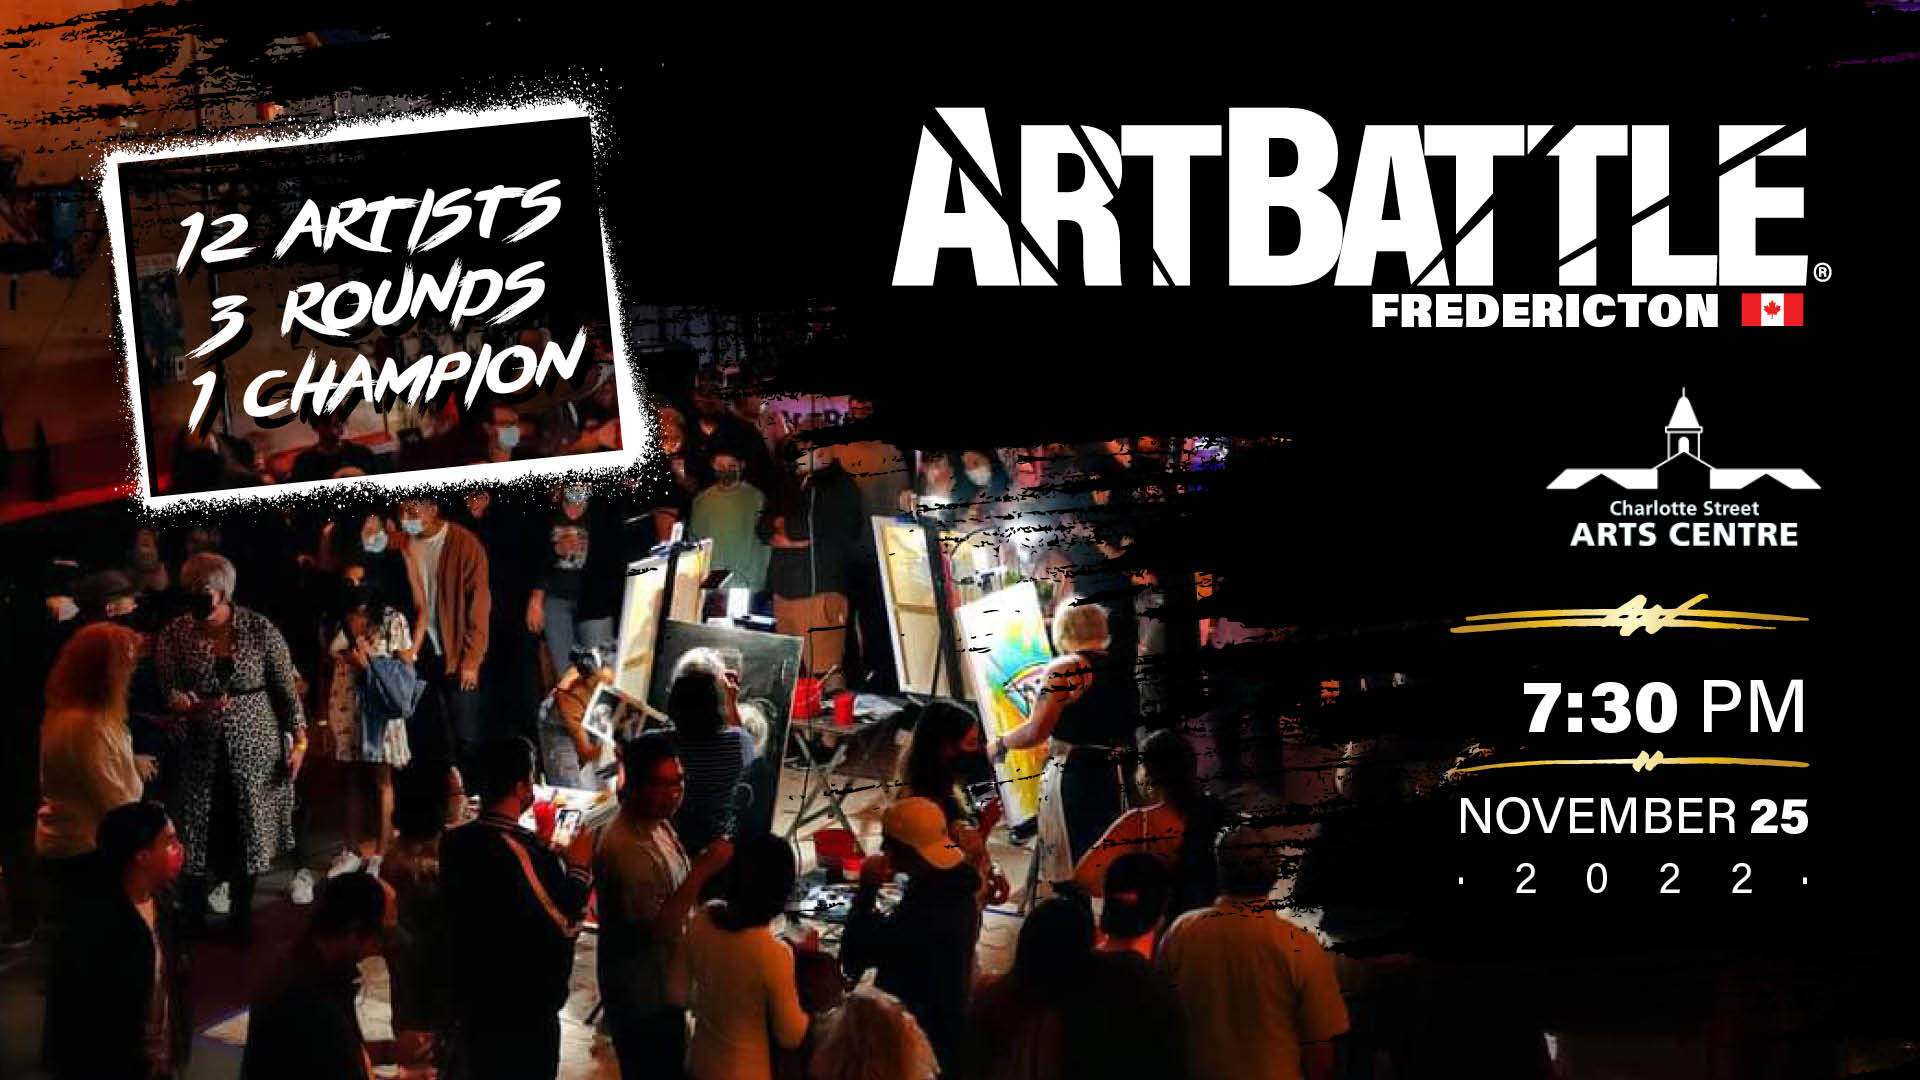 Image of the crowd at an Art Battle event. Text reads: 12 artists, 3 rounds, 1 champion. Art Battle Fredericton, Charlotte Street Arts Centre, 7:30pm, November 25, 2022.